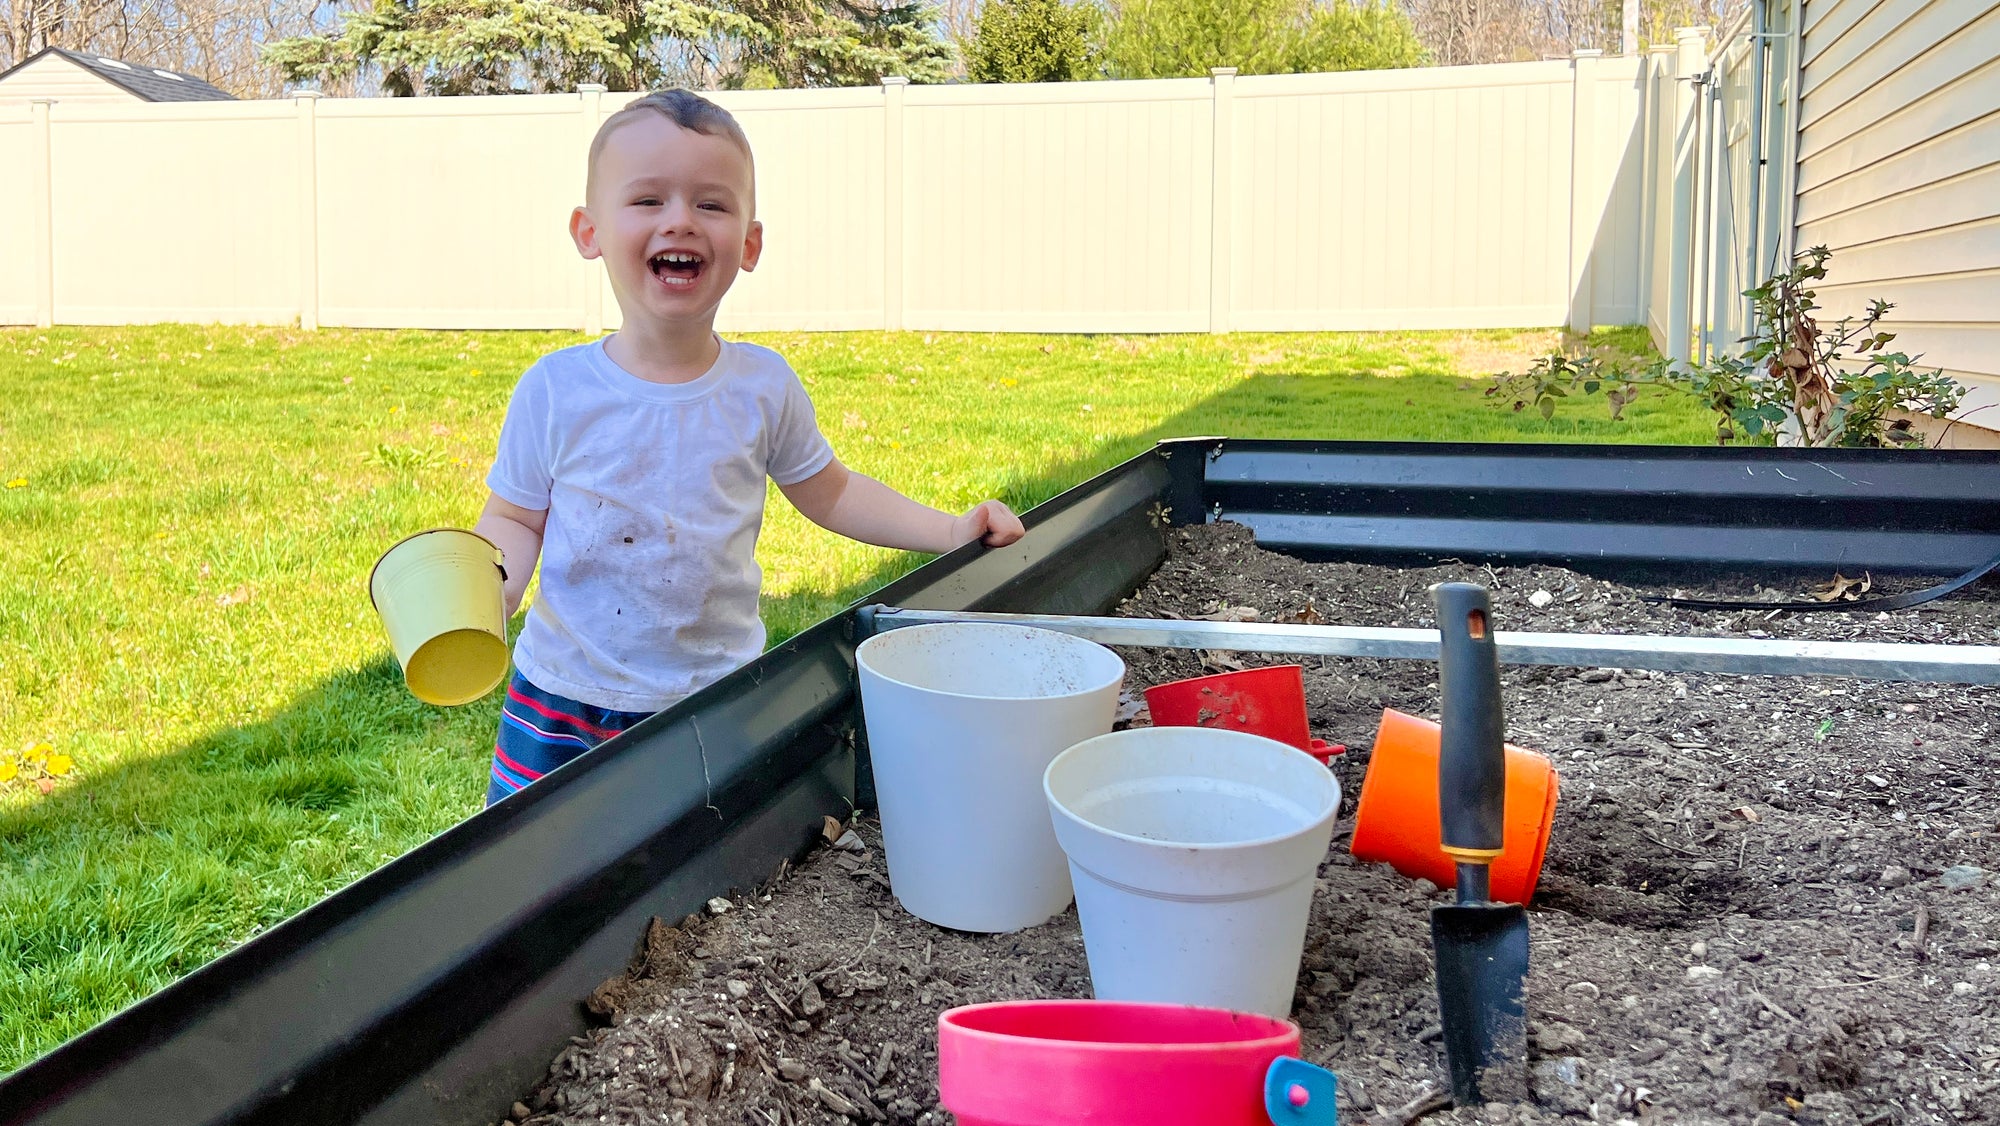 Toddler playing in a garden getting dirty